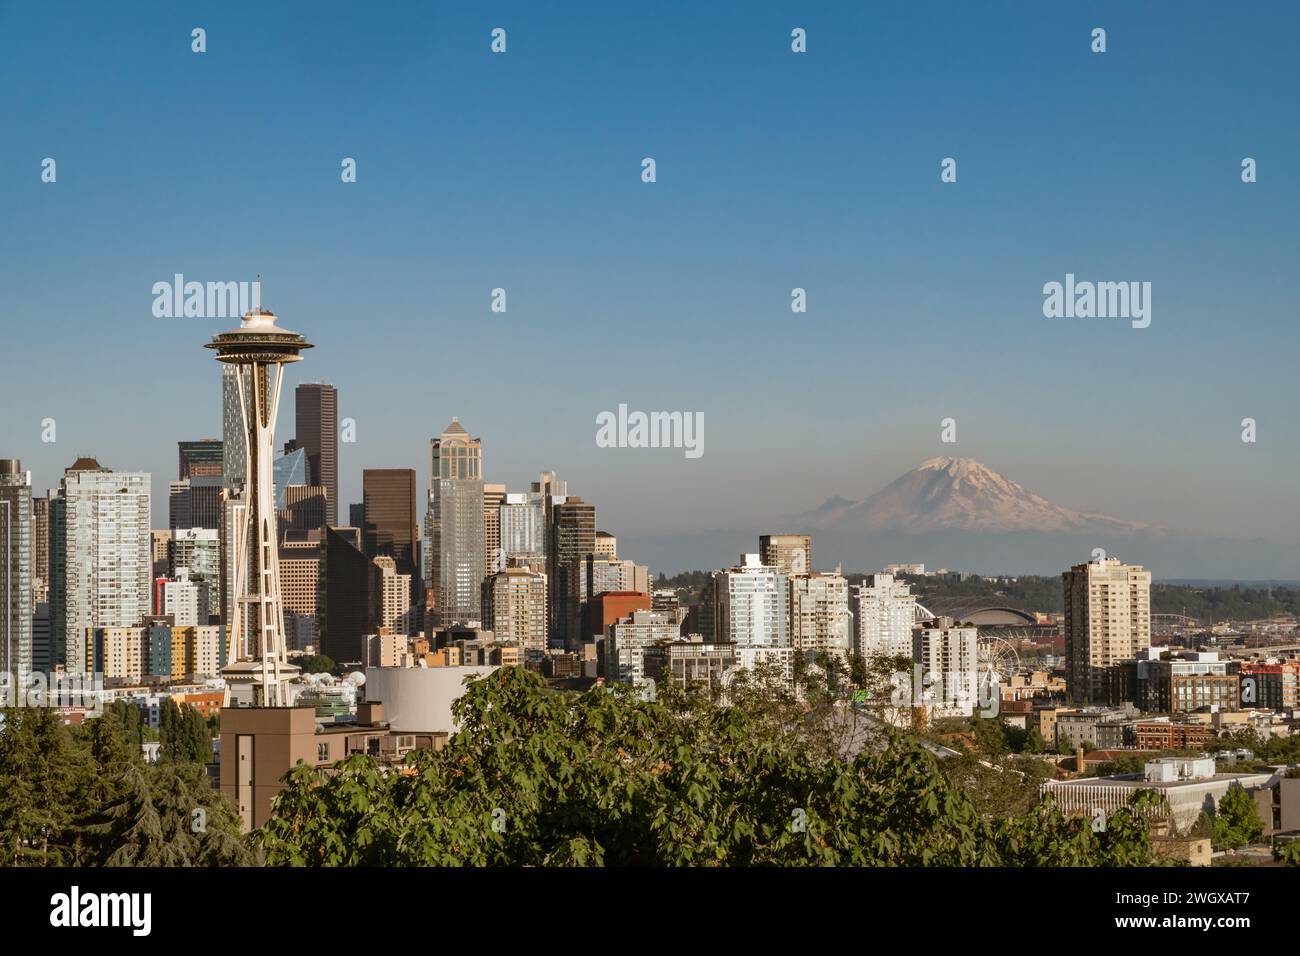 Seattle skyline with Space Need in foreground and Mt. Ranier in distance. Stock Photo